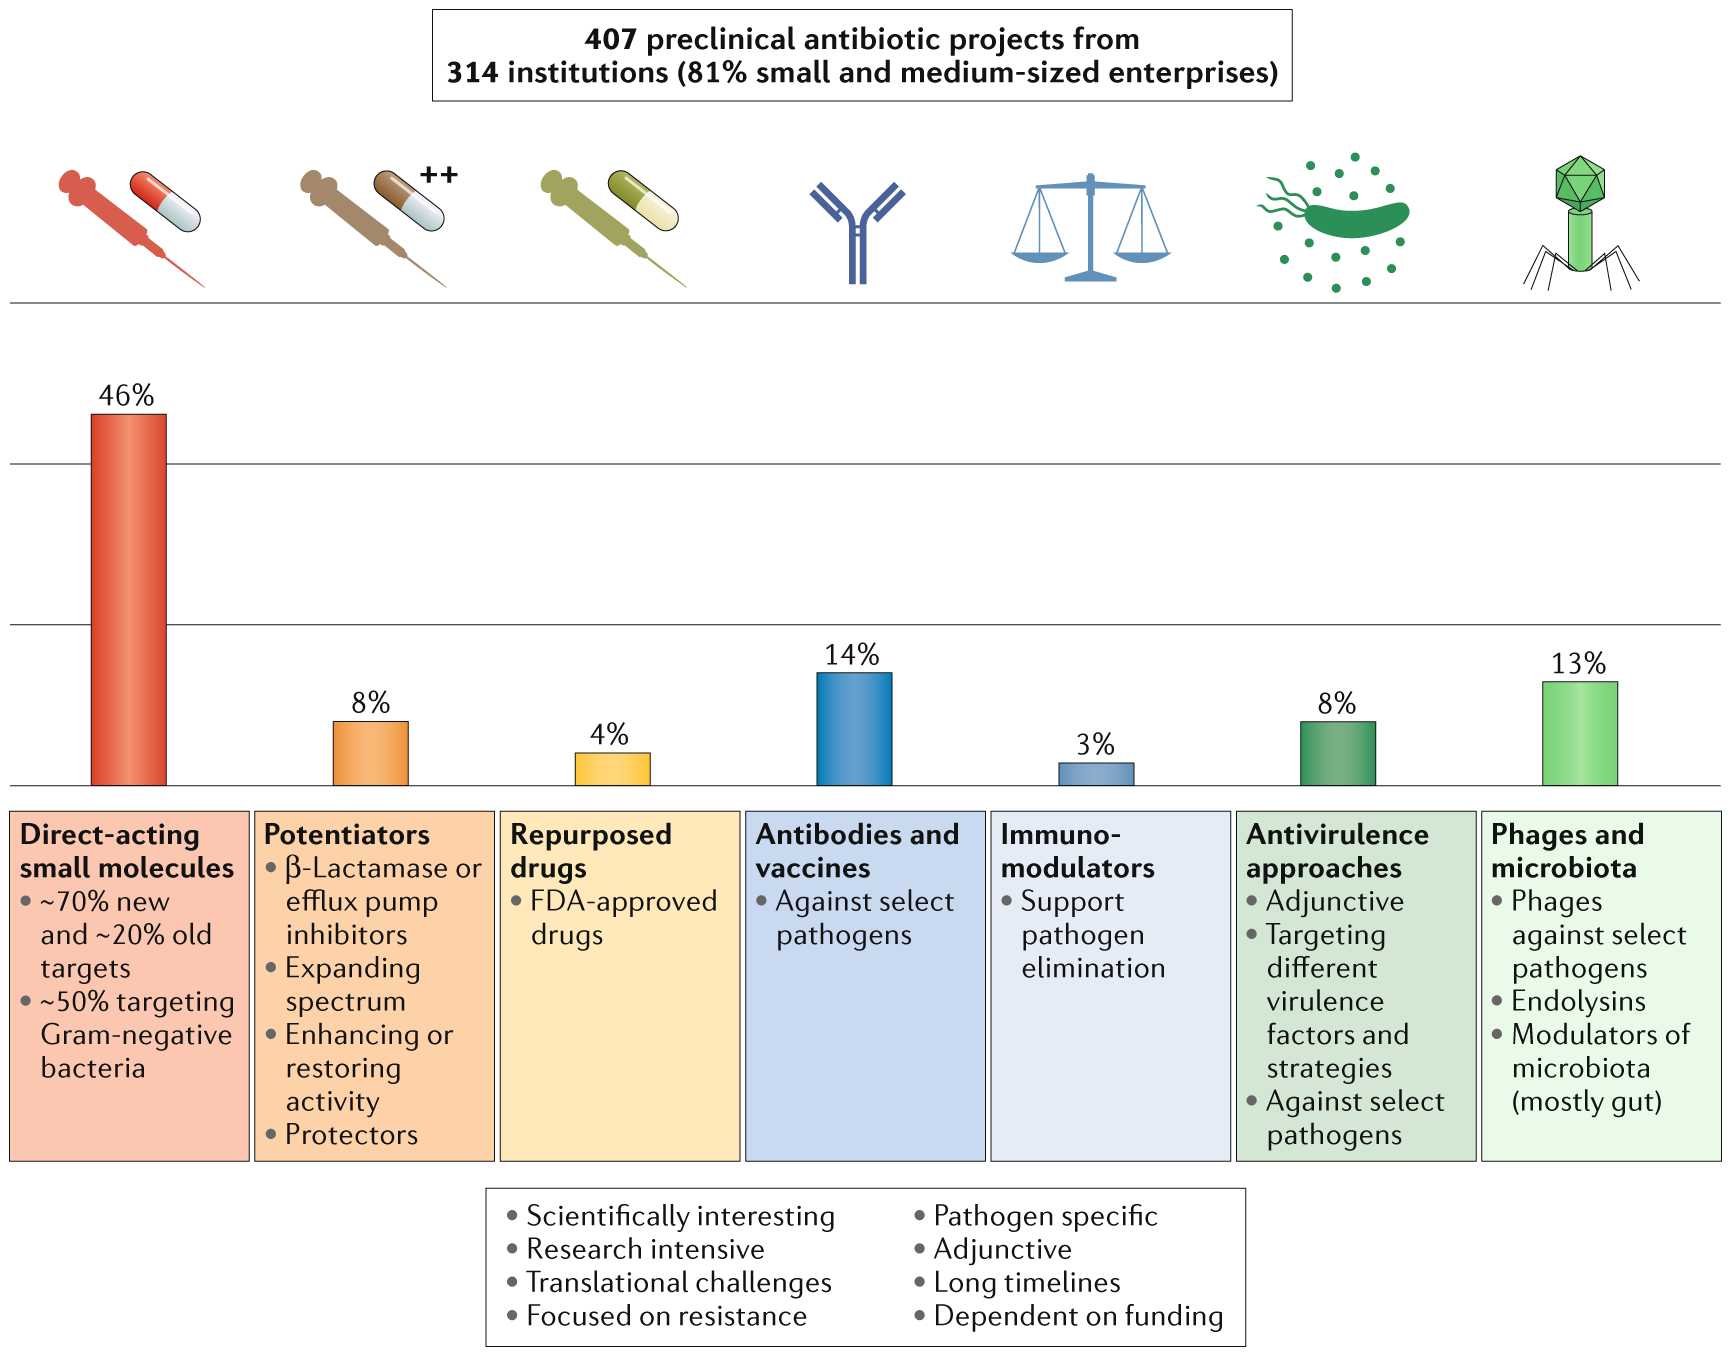 The global preclinical antibacterial pipeline | Nature Reviews Microbiology